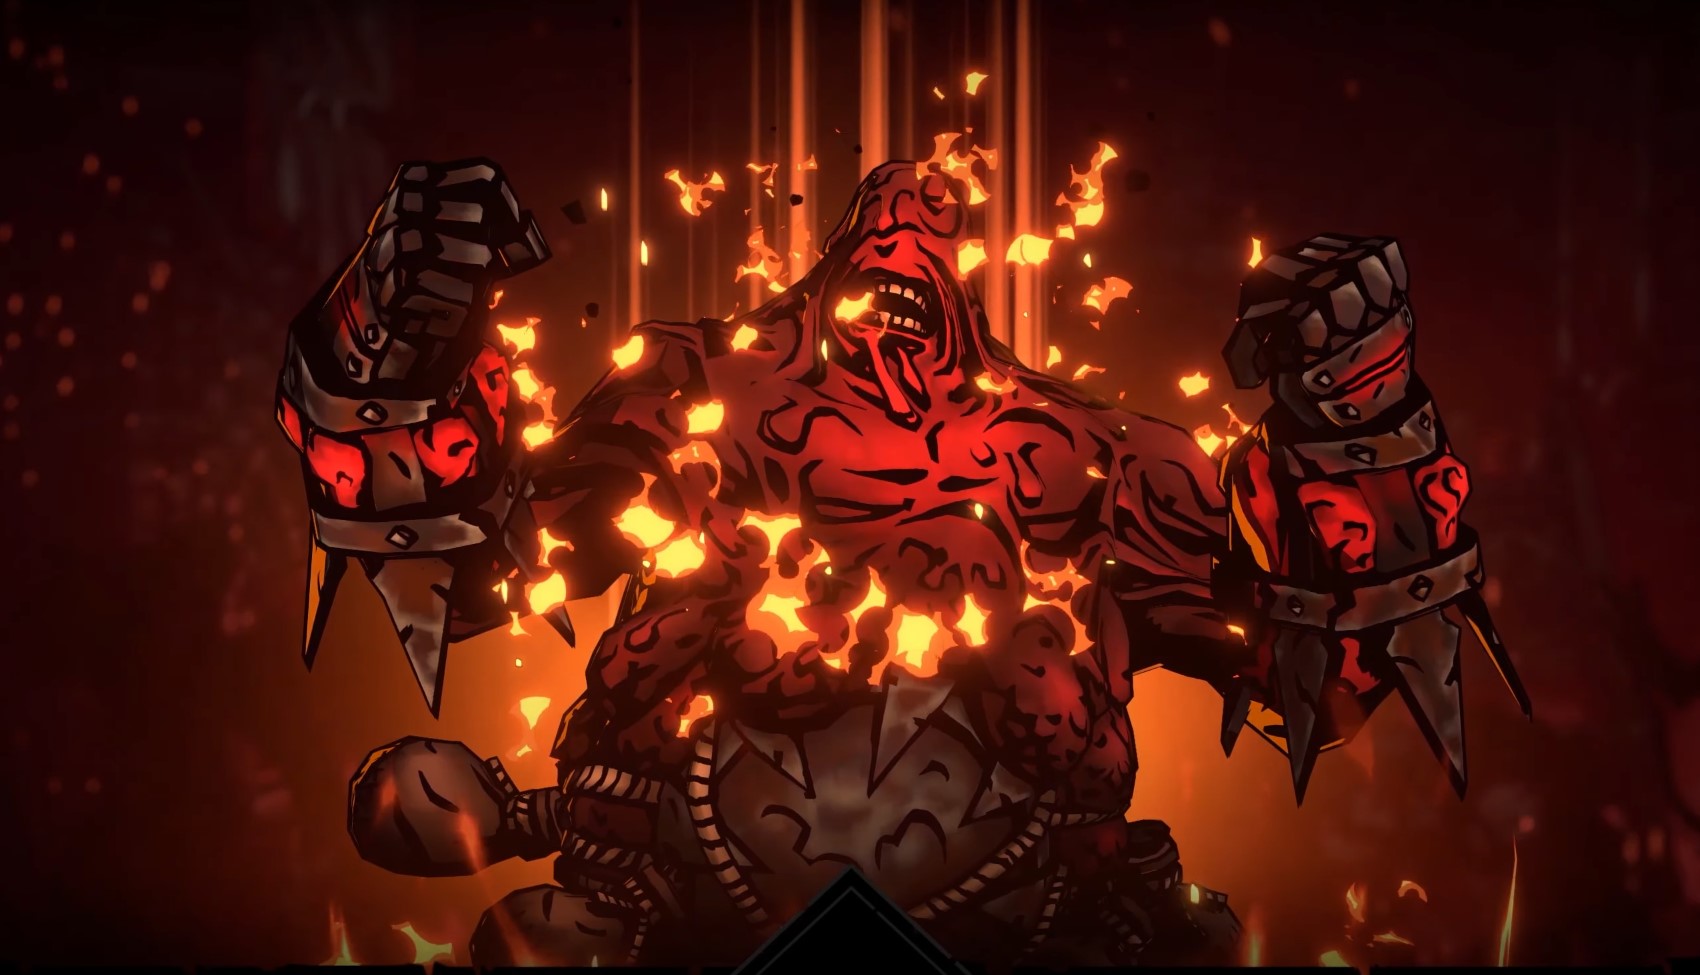  Darkest Dungeon 2's launch trailer is here to get you hyped about dying miserably 